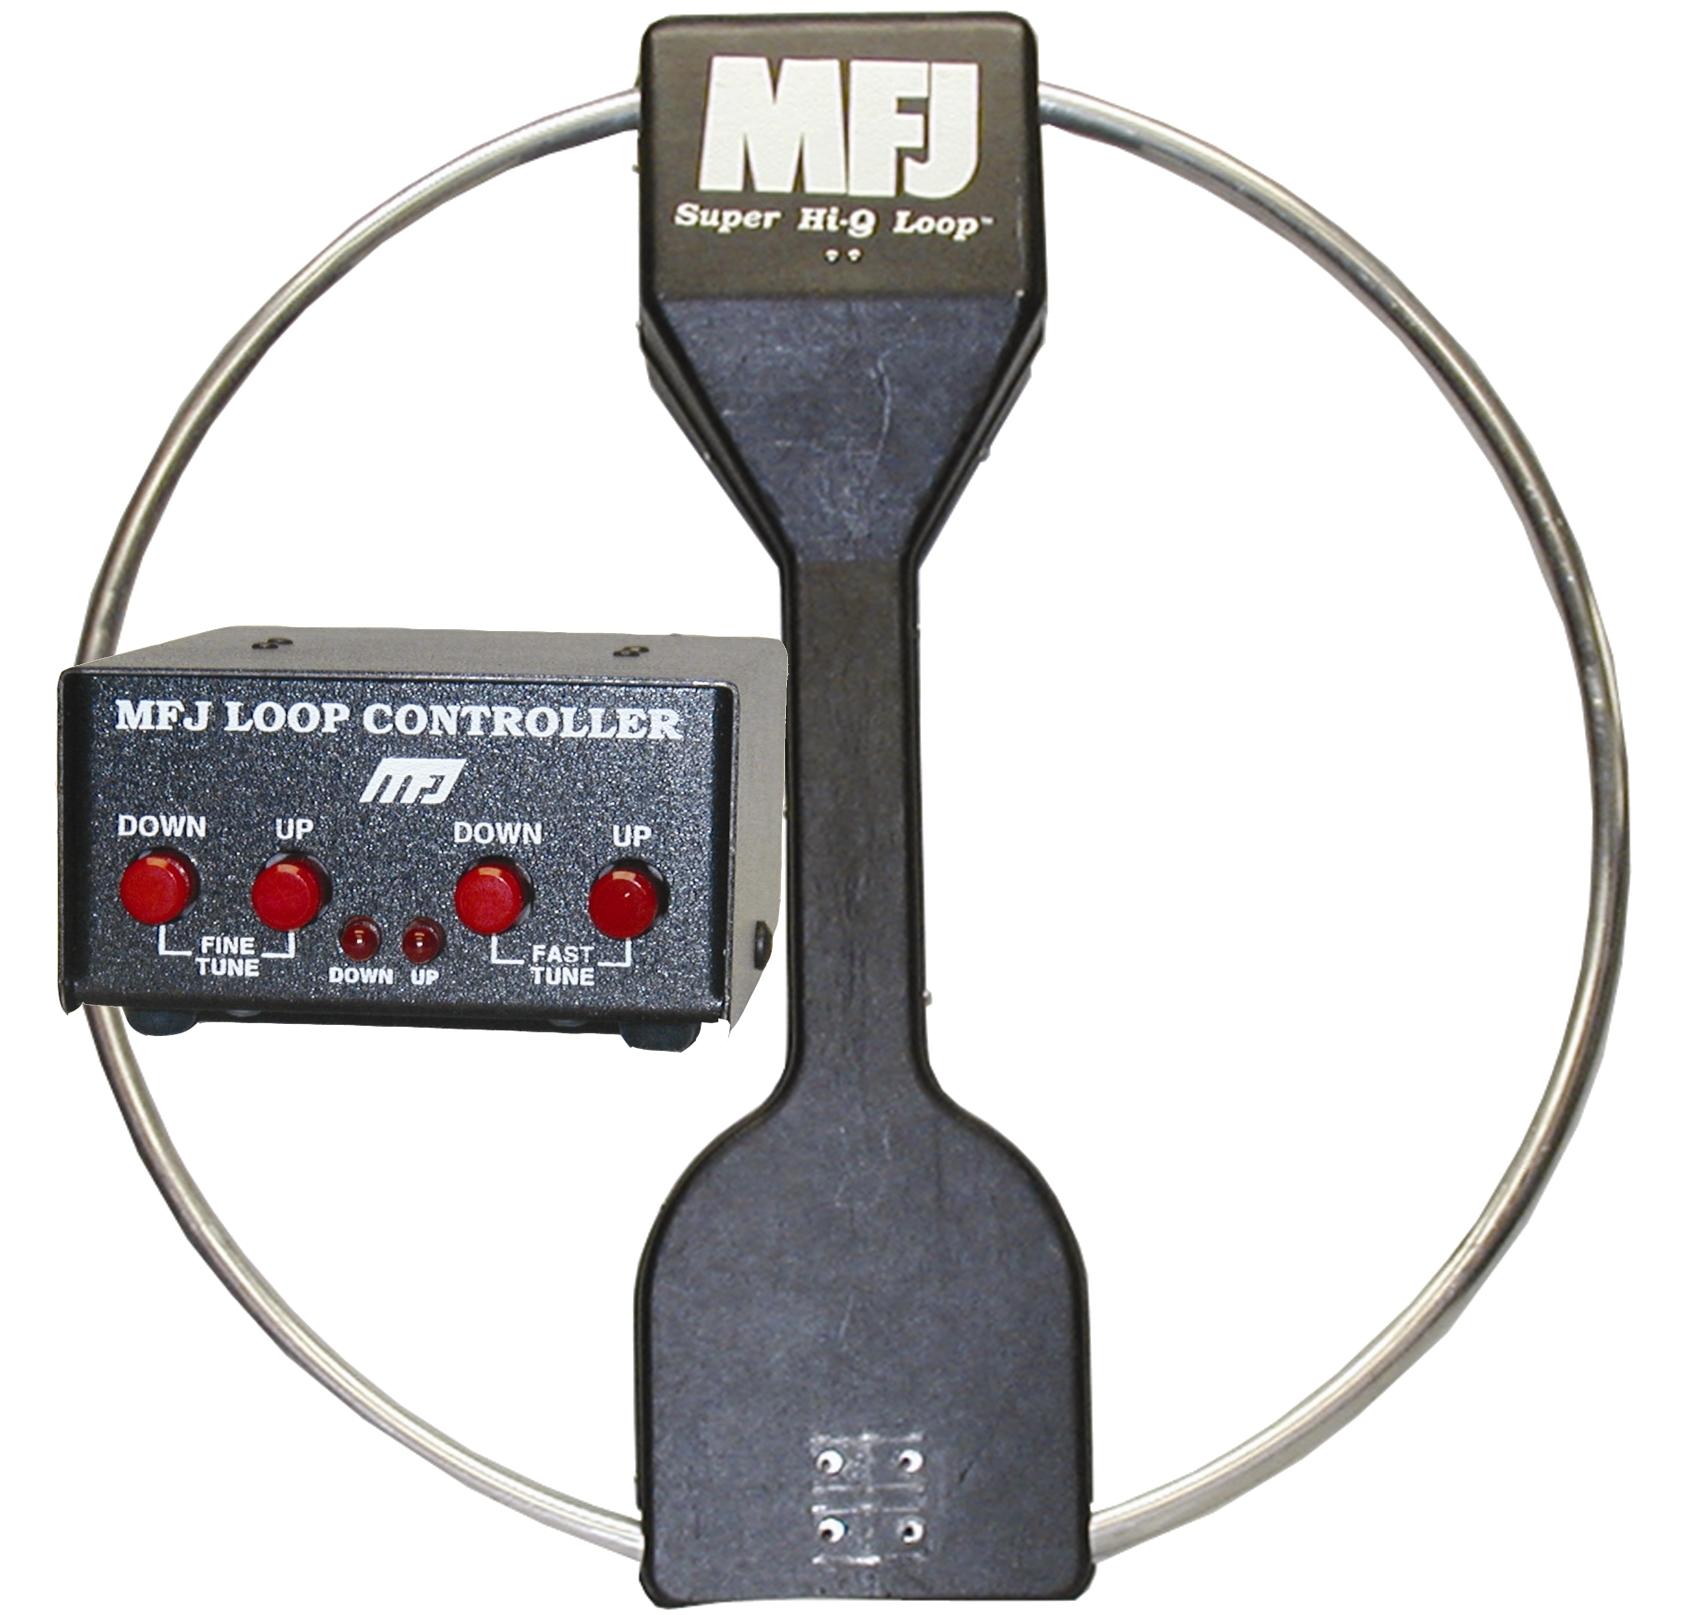 Mfj-1782x magnetic loop antenna without swr,pwr meter